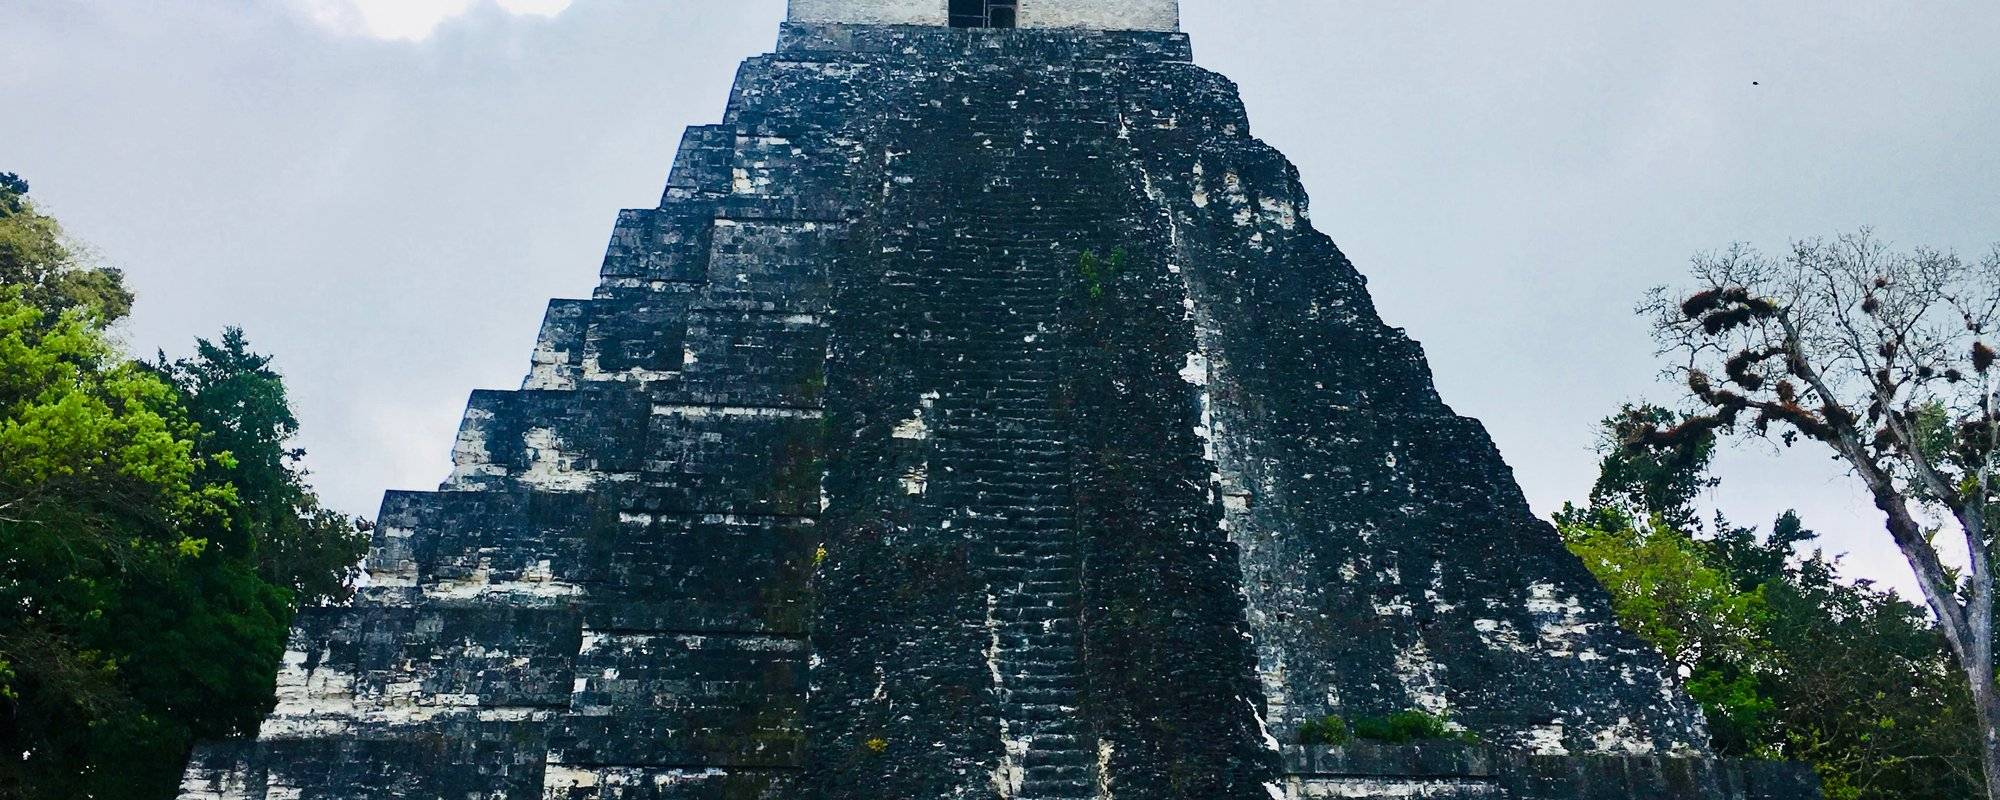 Guatemala Part 9: Discovering the Mayan Ruins of Tikal hidden in the jungle (Fotos + Videos)